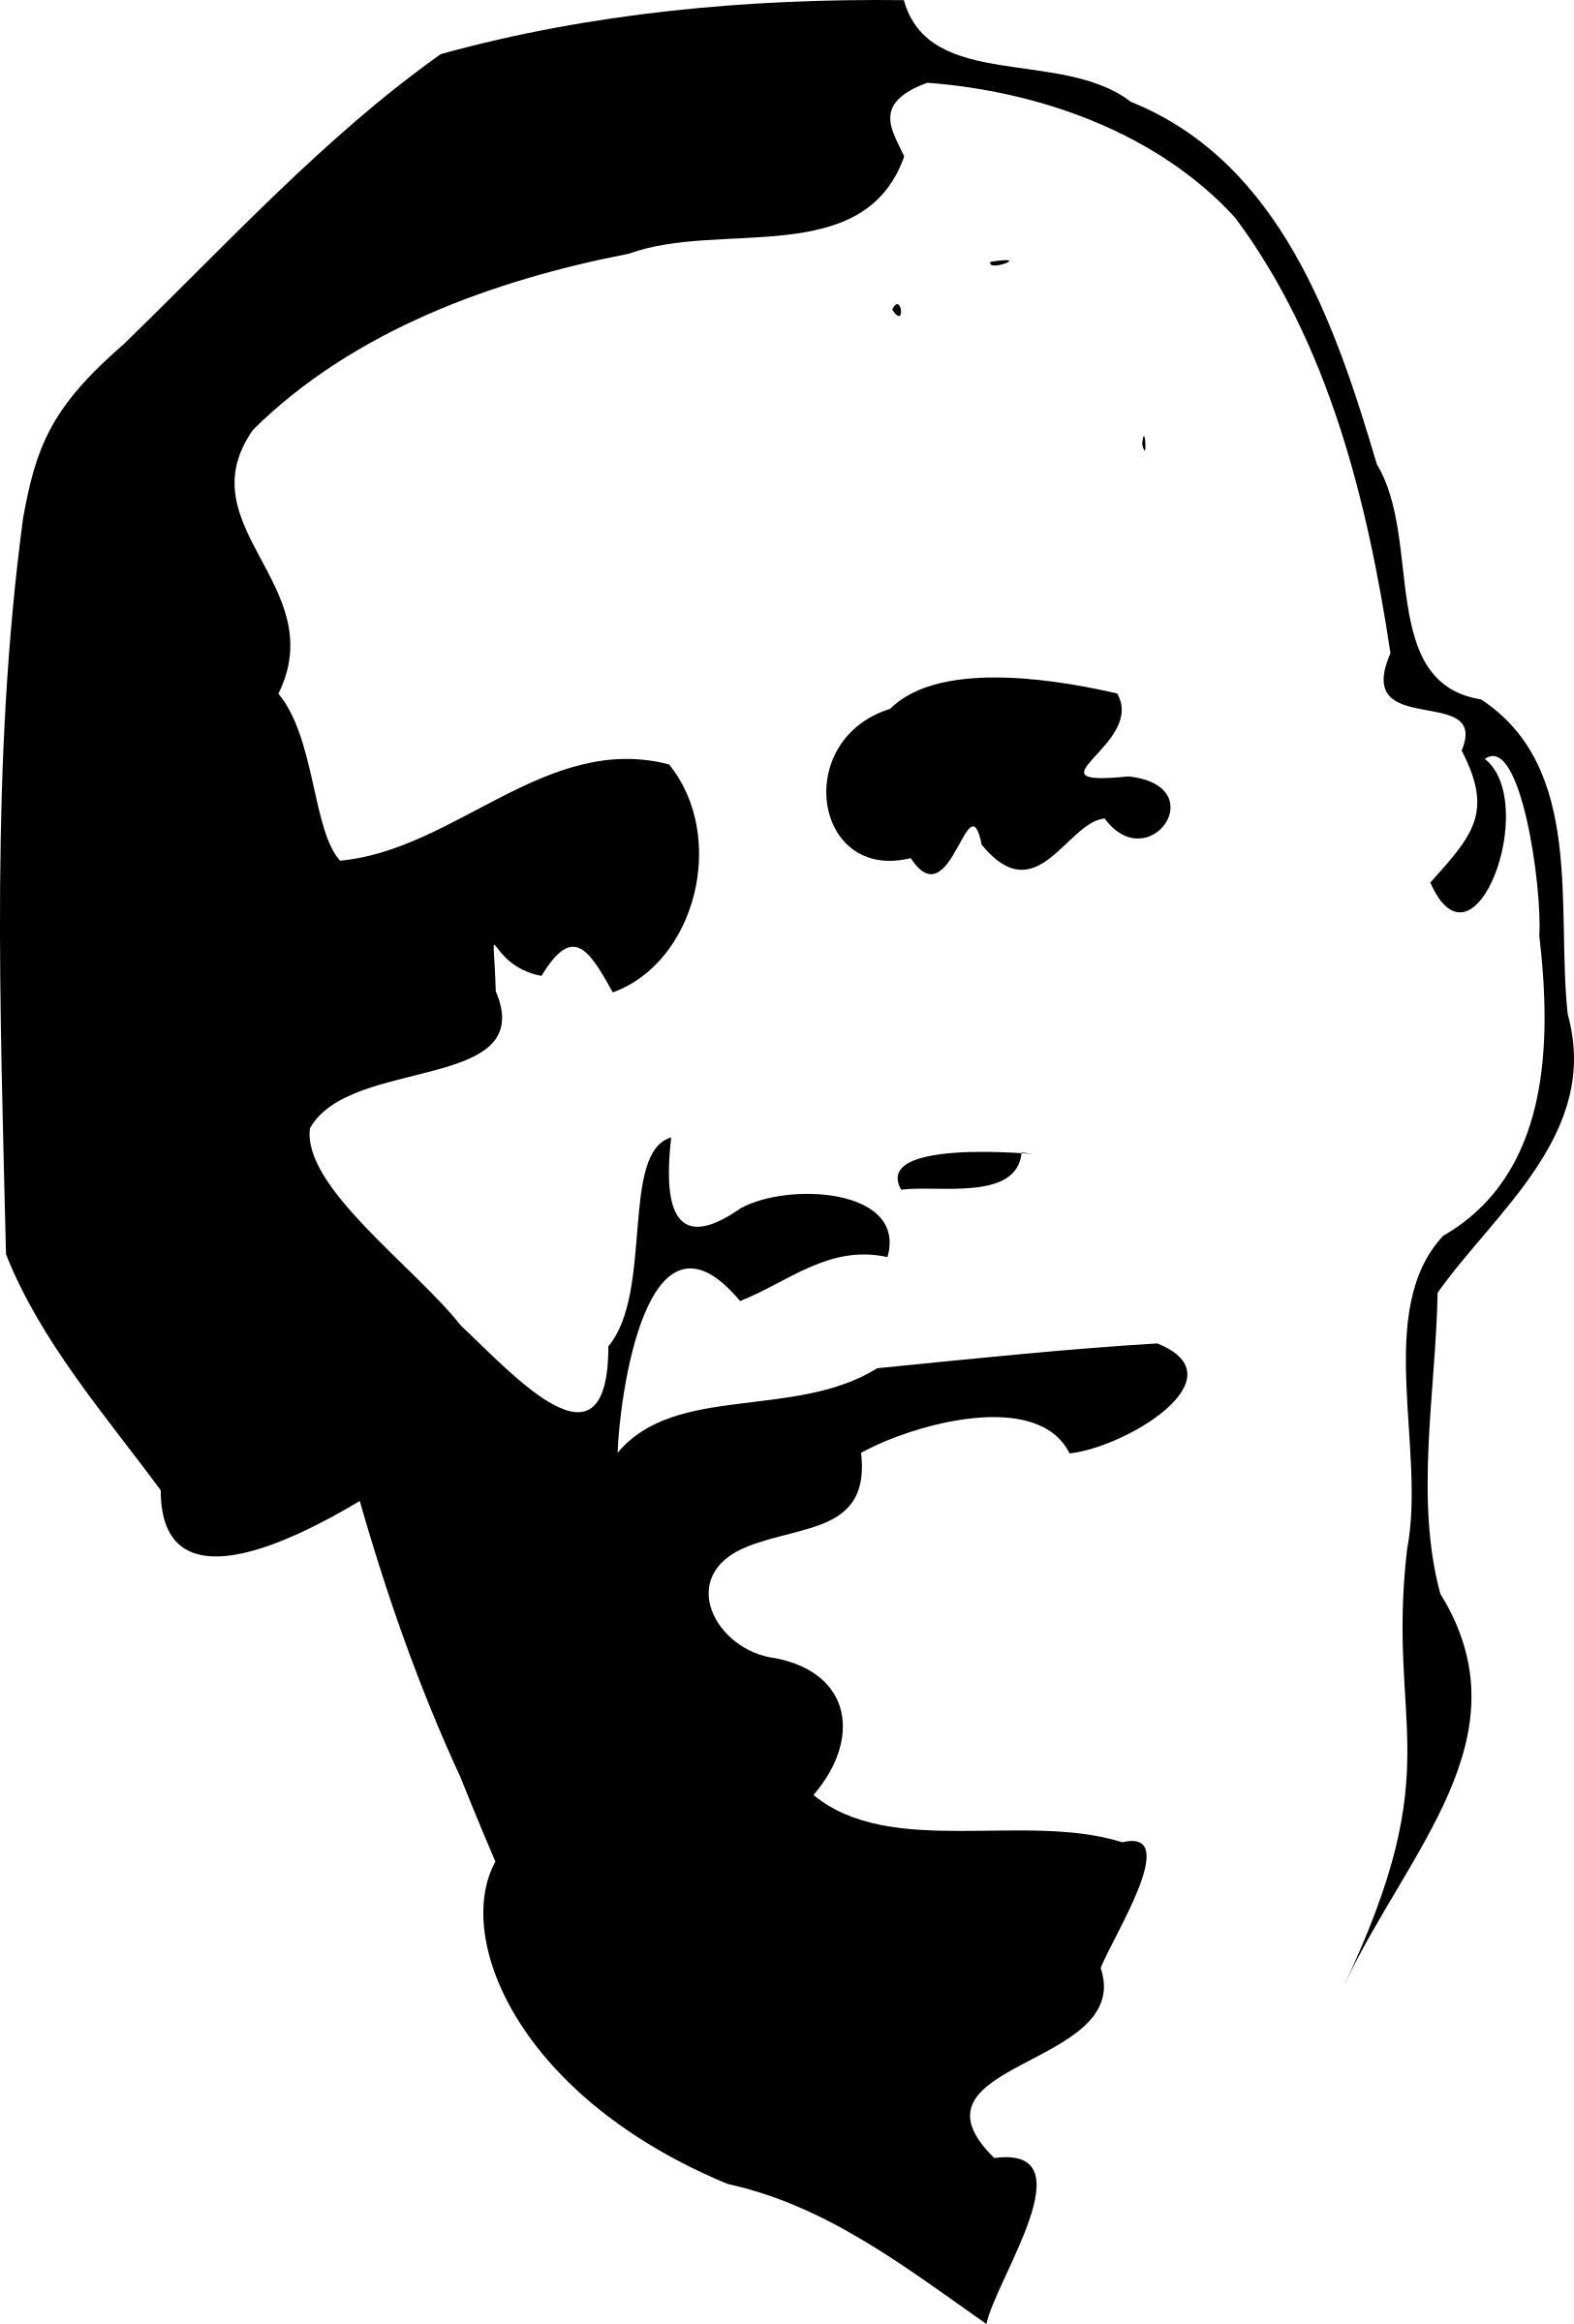 obama portrait bw PNG icons